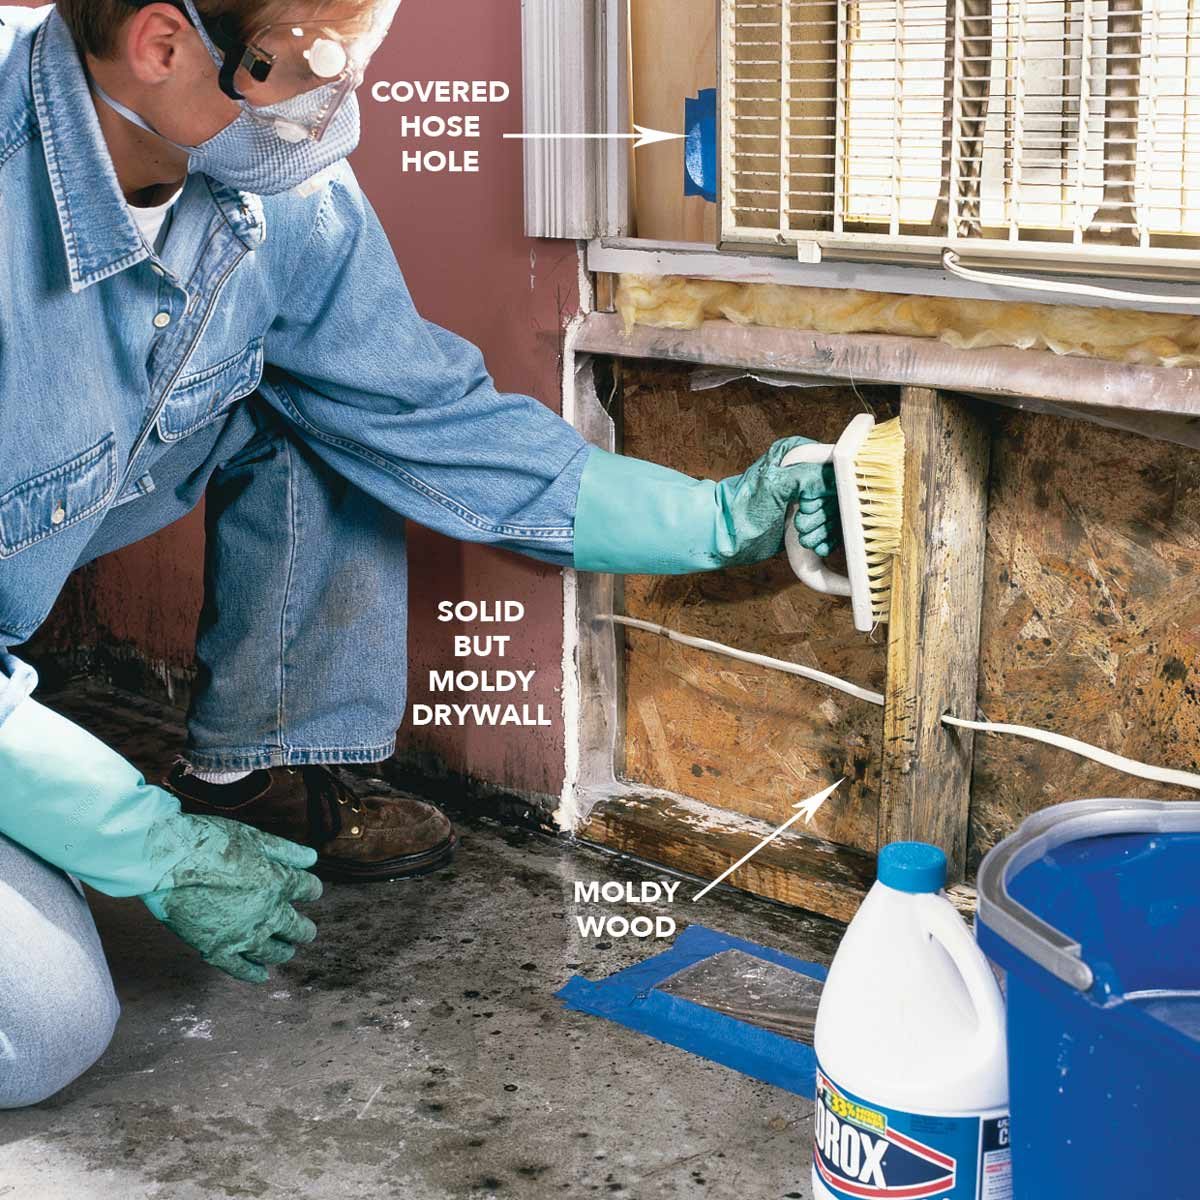 Scrub moldy surfaces with mold cleaner